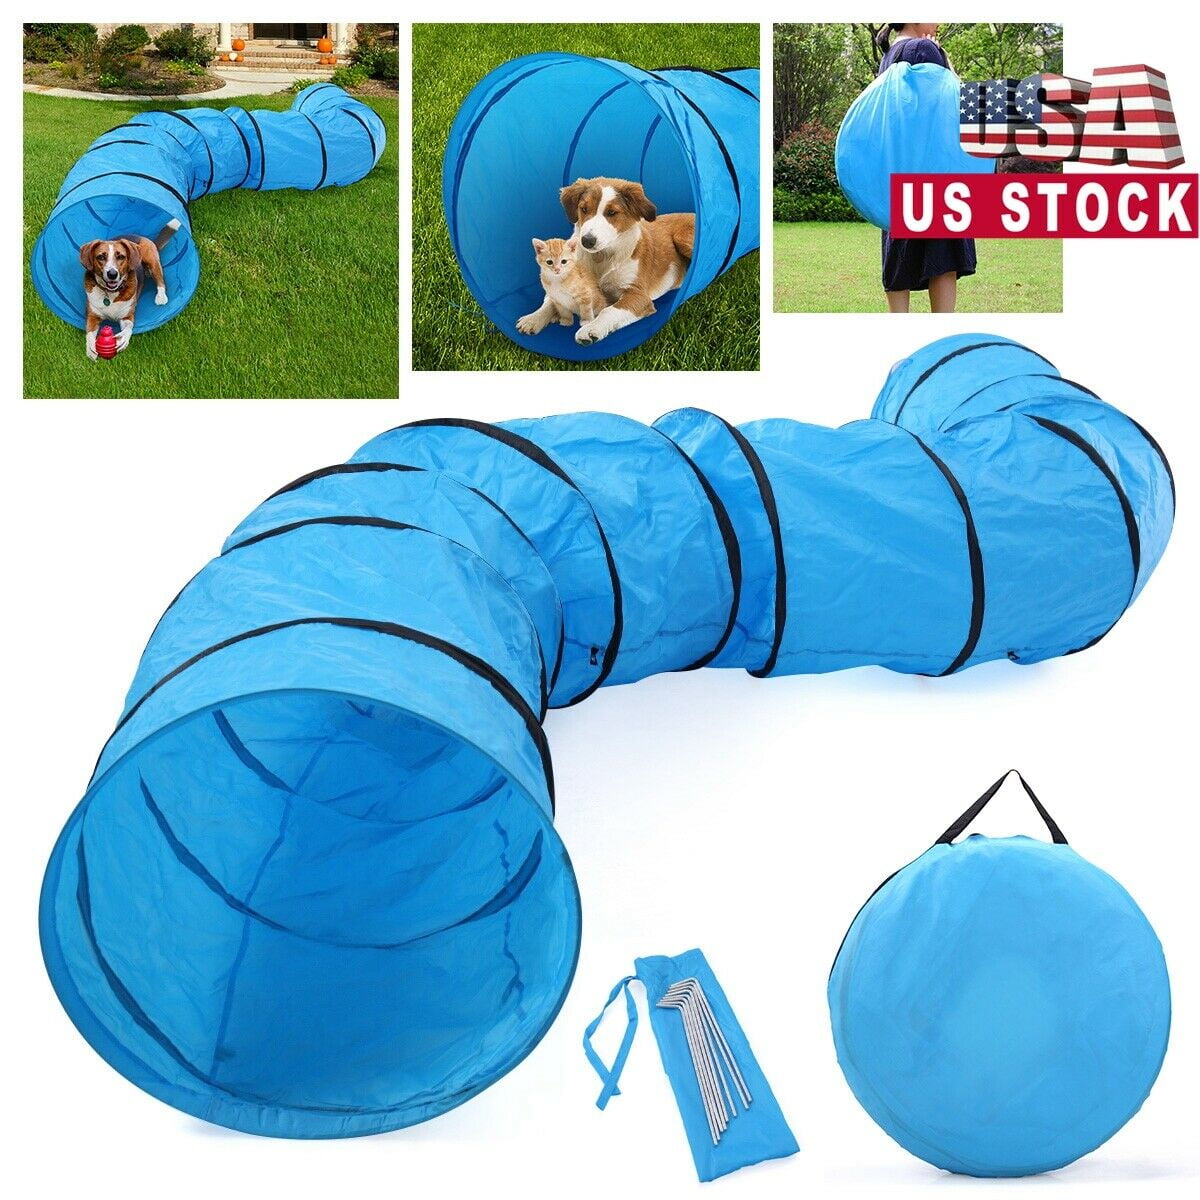 Dog Pet Agility Obedience Training Tunnel 18' New 